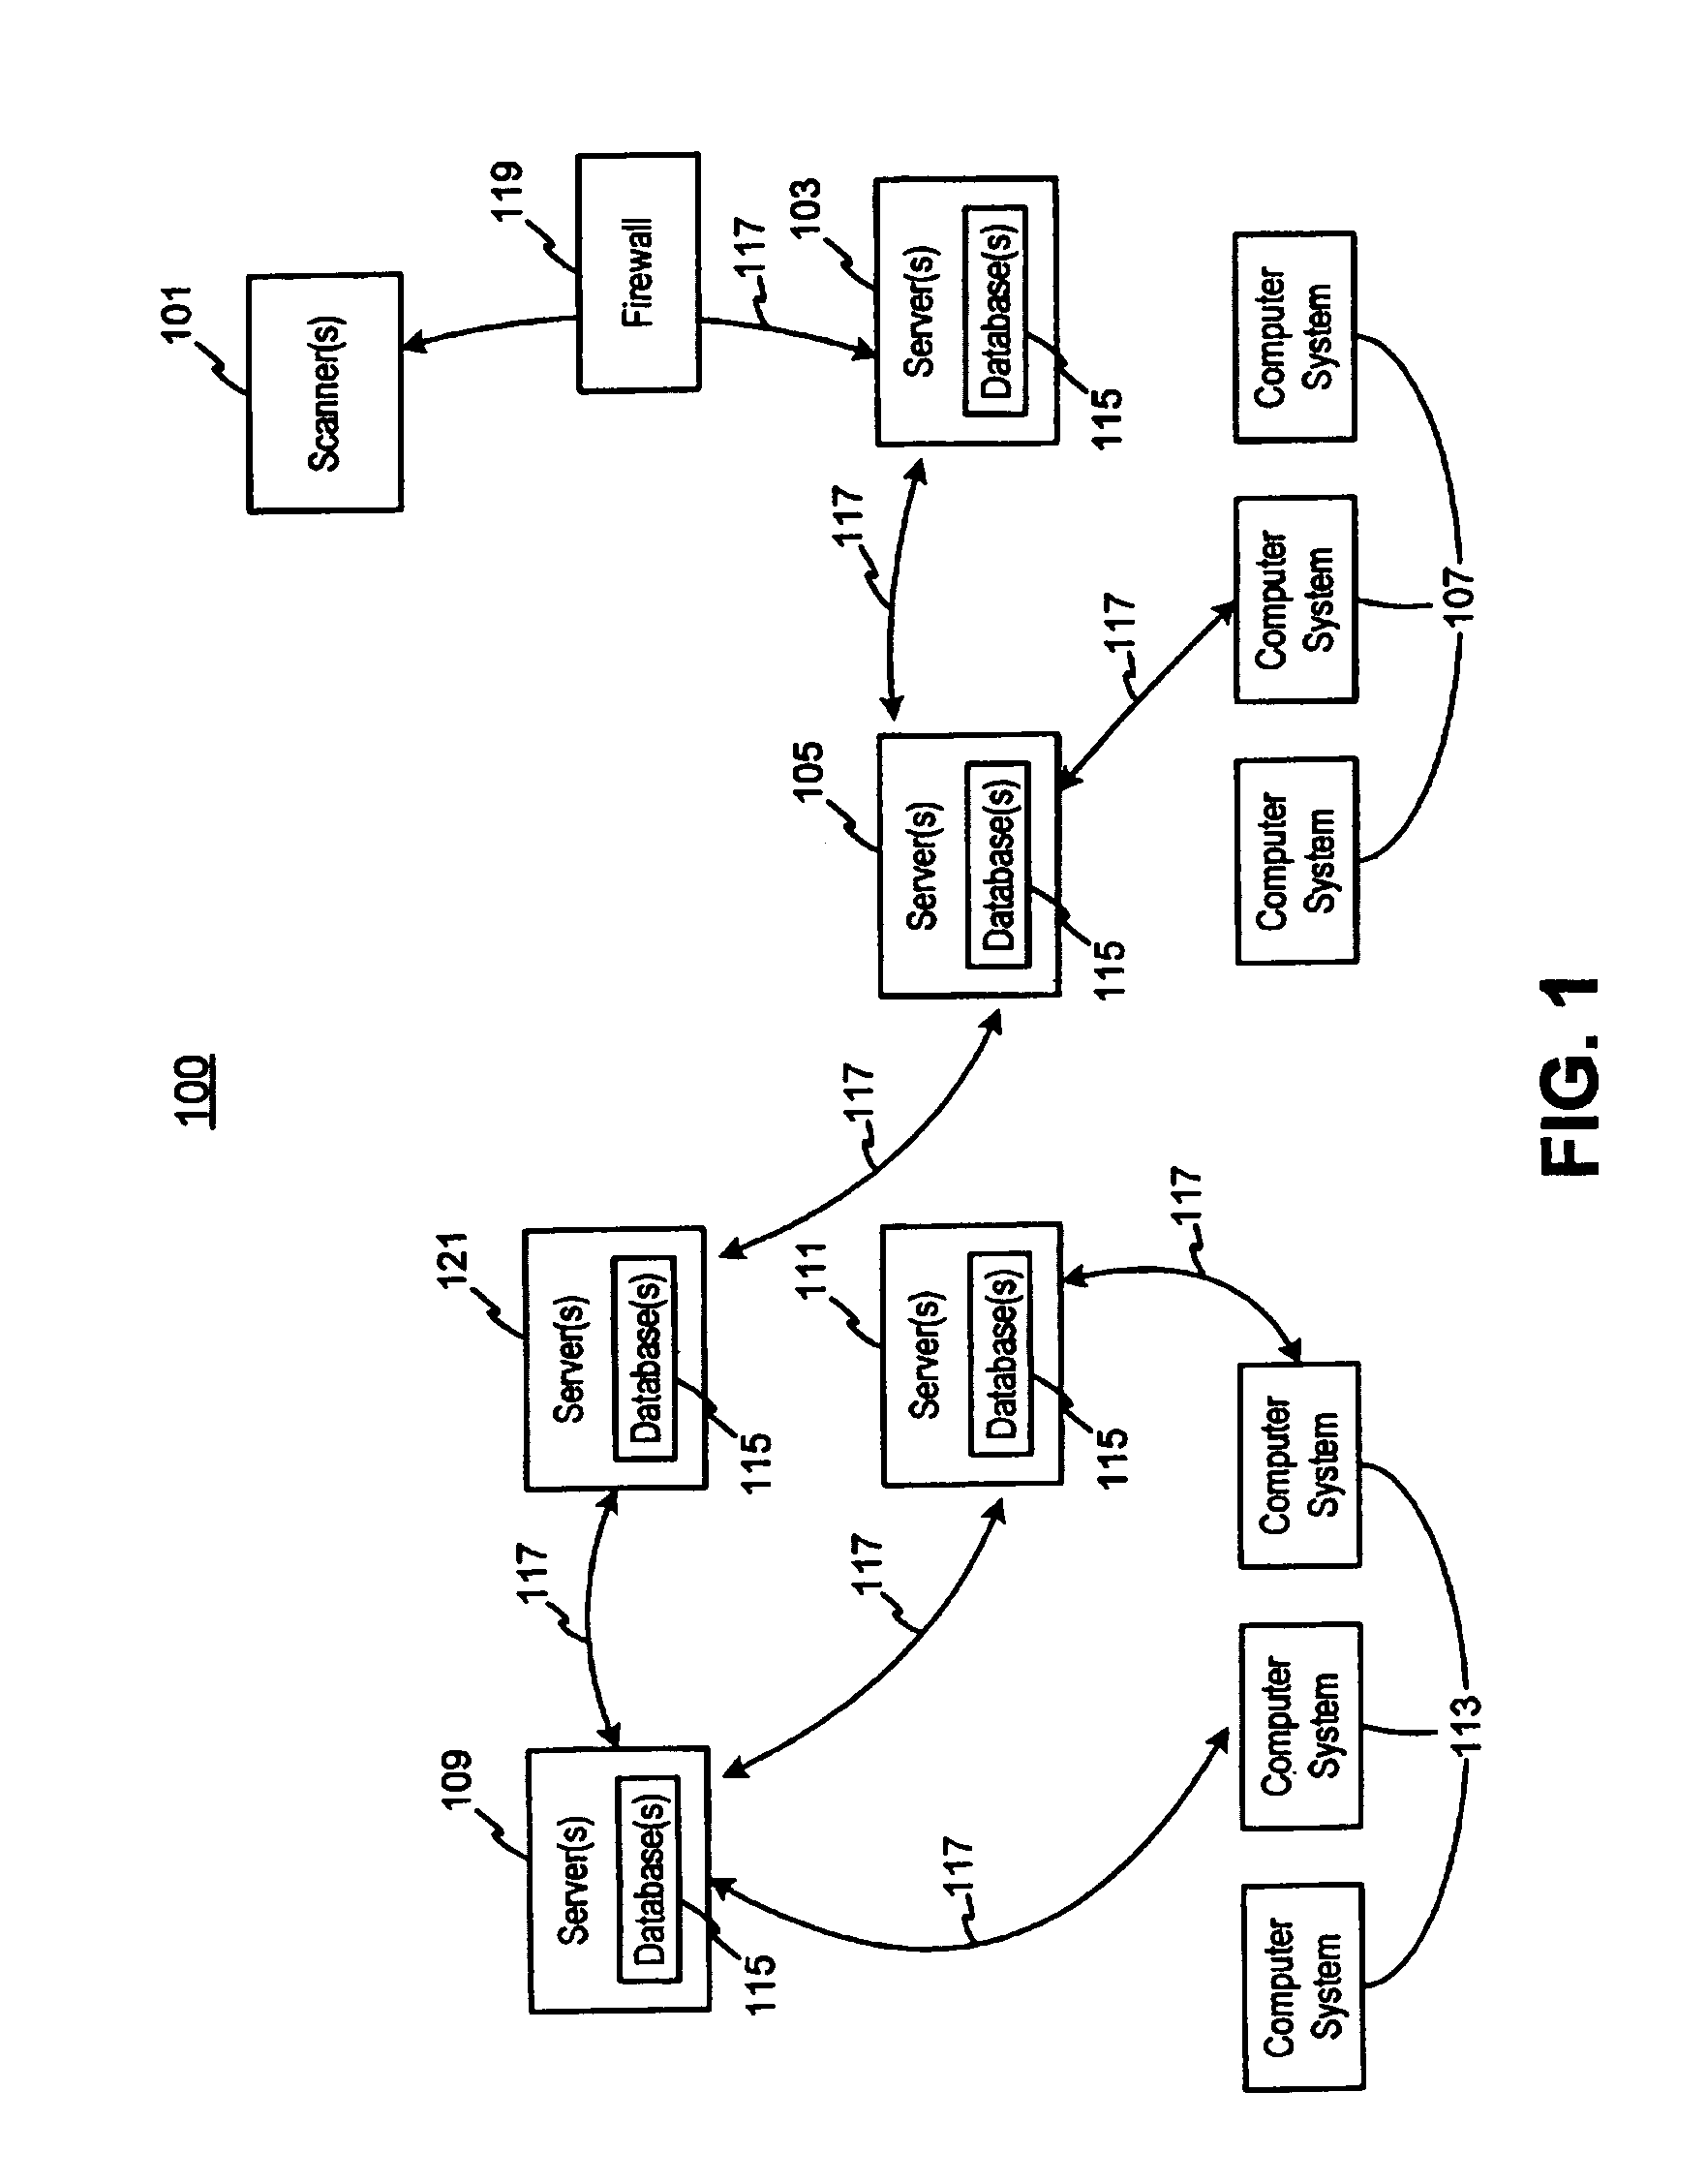 Electronic document imaging and delivery system and method